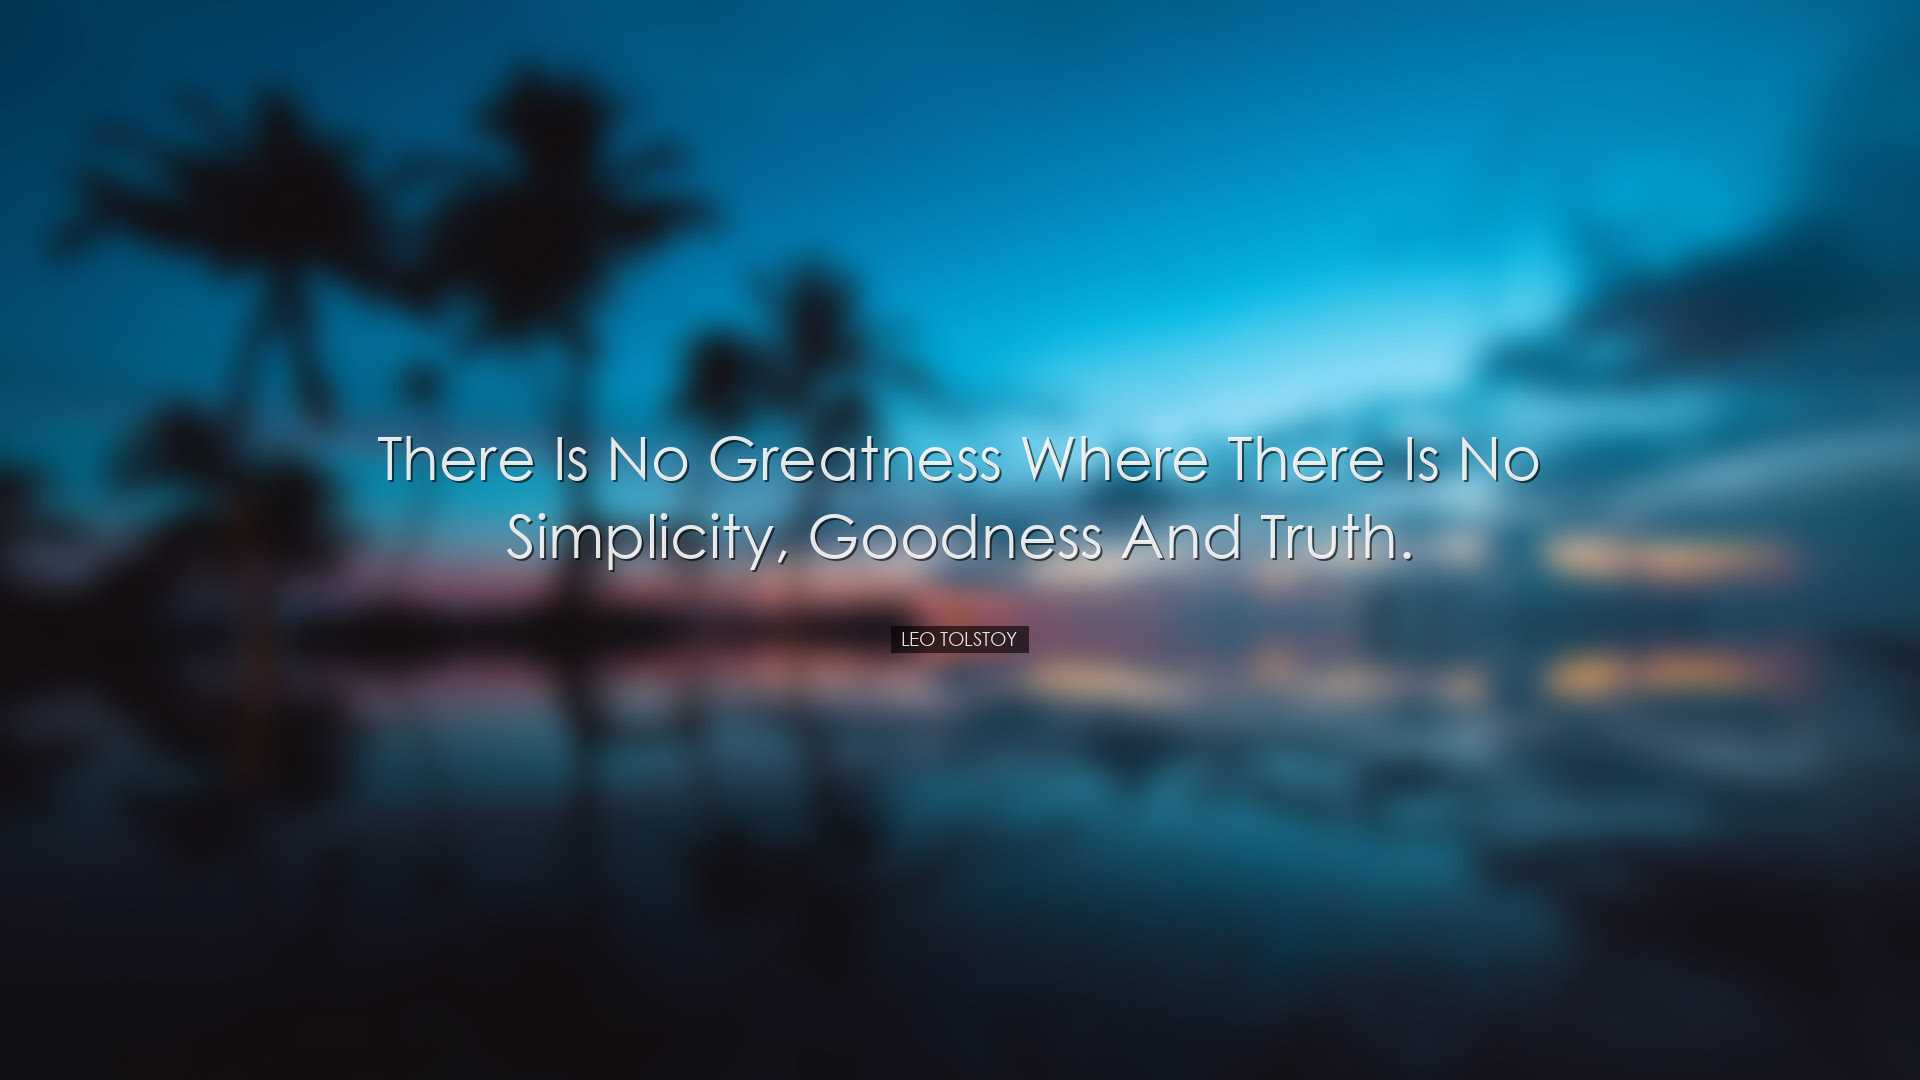 There is no greatness where there is no simplicity, goodness and t